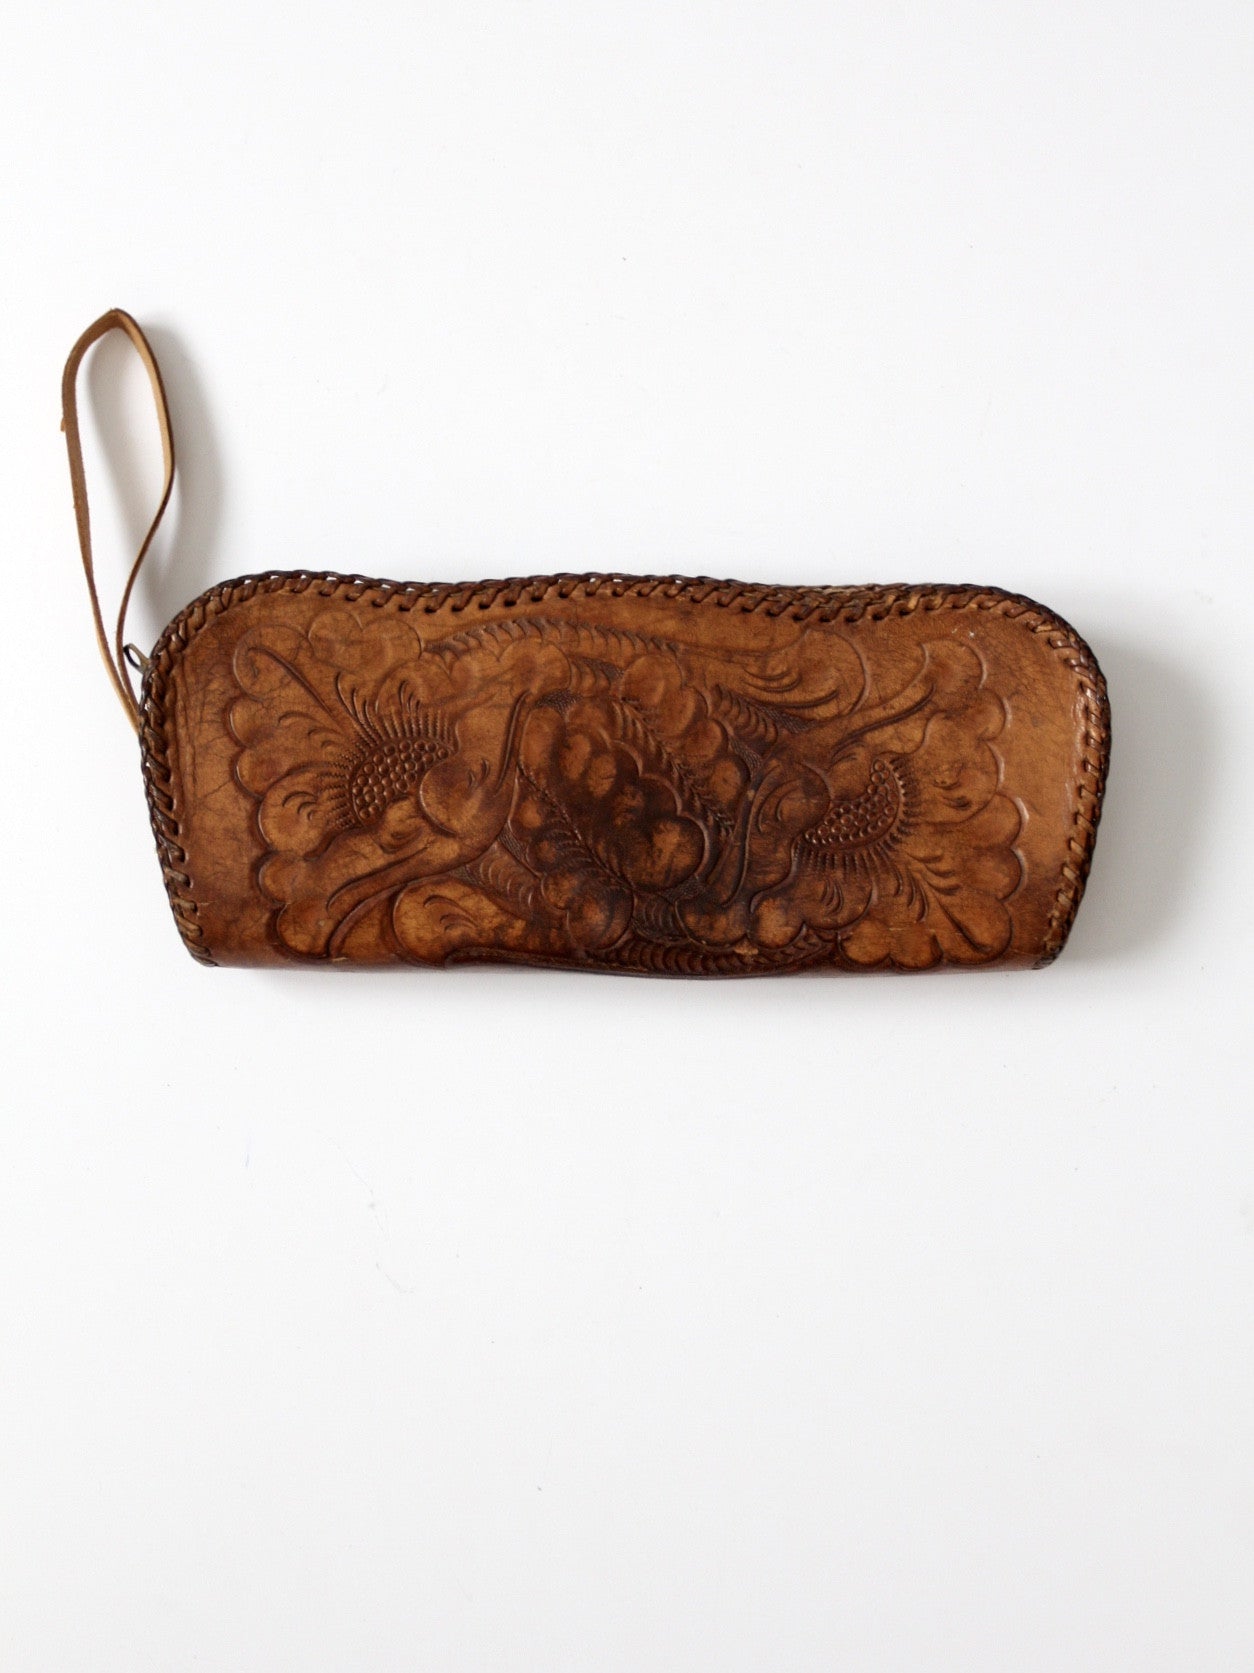 Real Hand Tooled Leather Wallet Carving Stylish Handmade Vintage Clutch  Women's | eBay